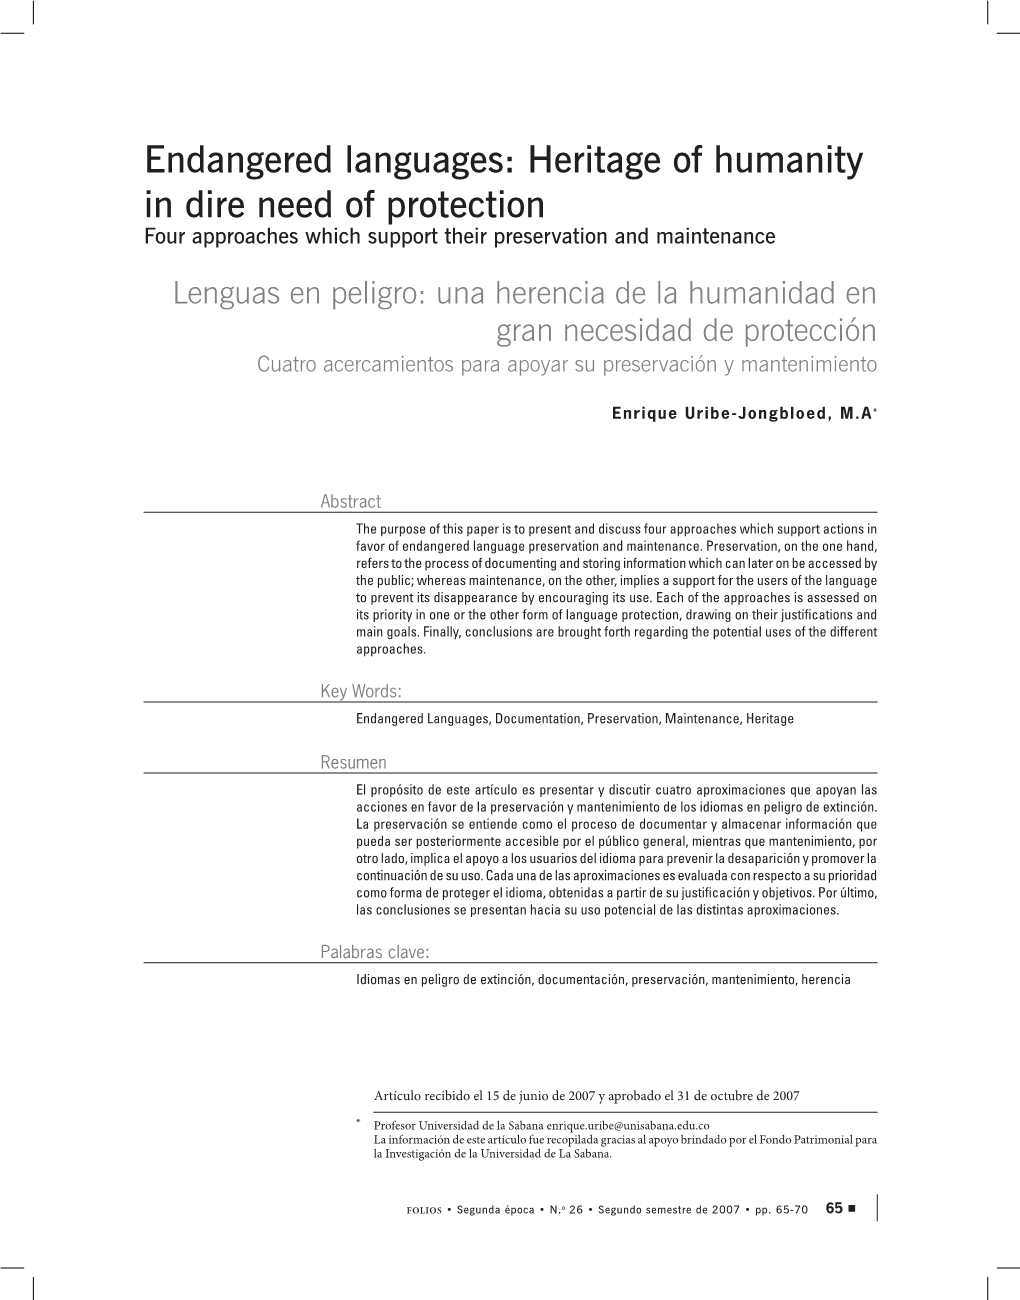 Endangered Languages: Heritage of Humanity in Dire Need of Protection